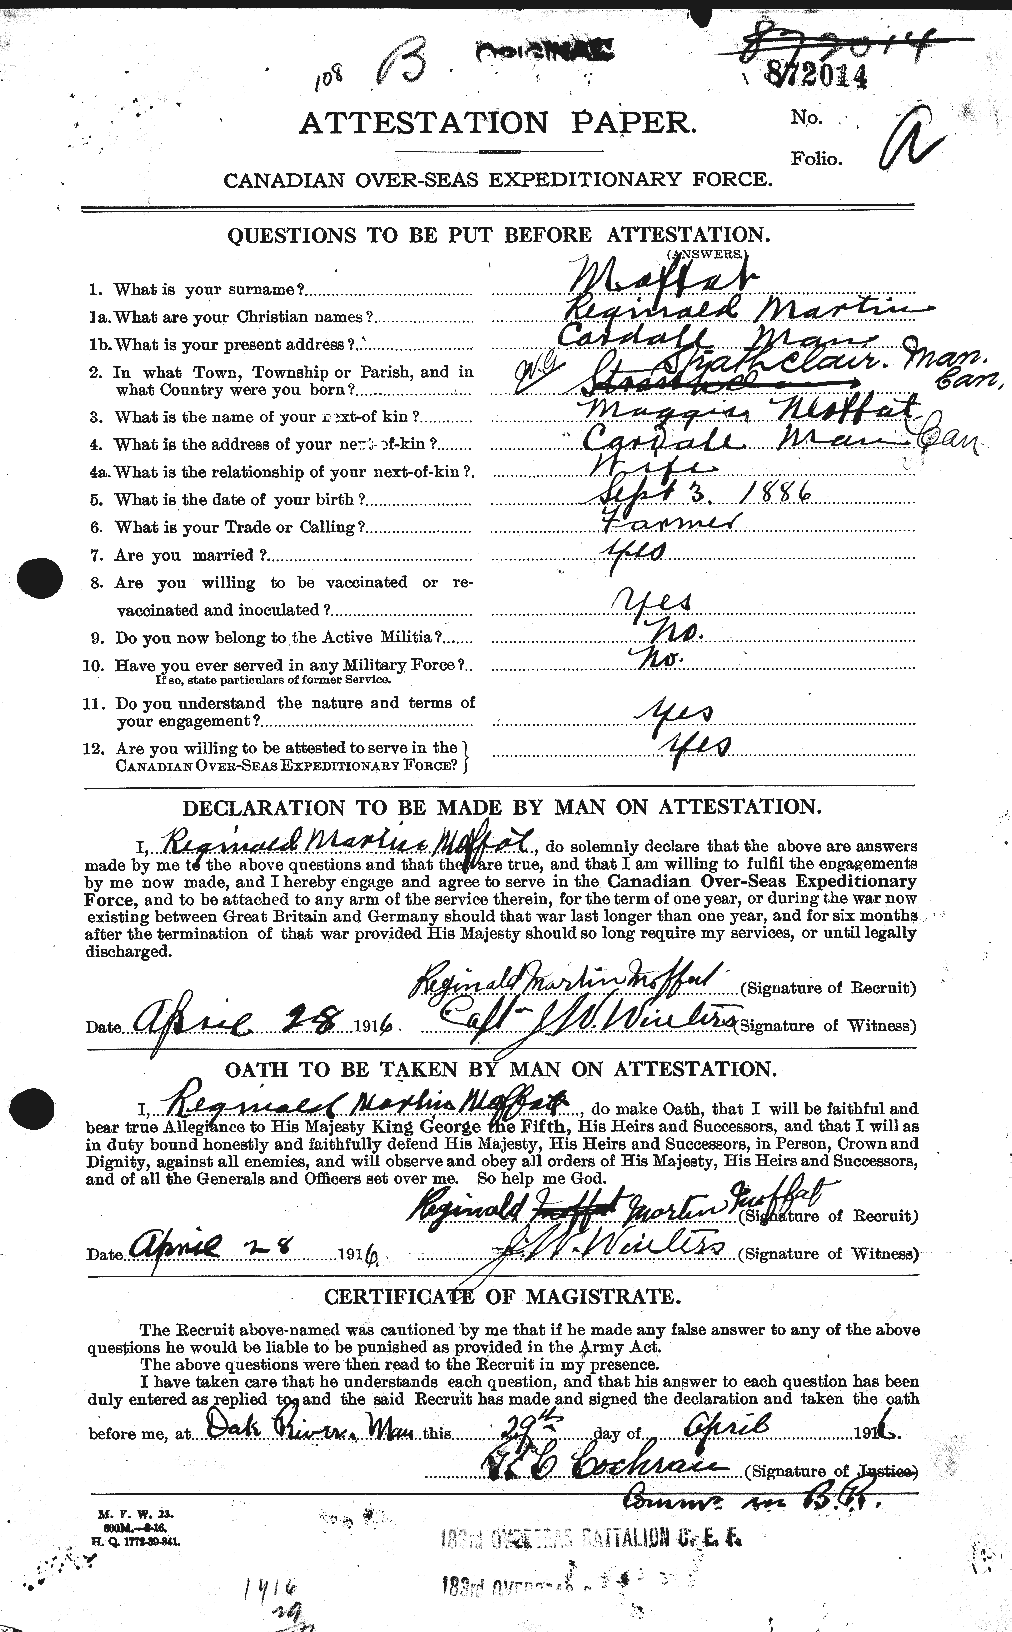 Personnel Records of the First World War - CEF 499060a